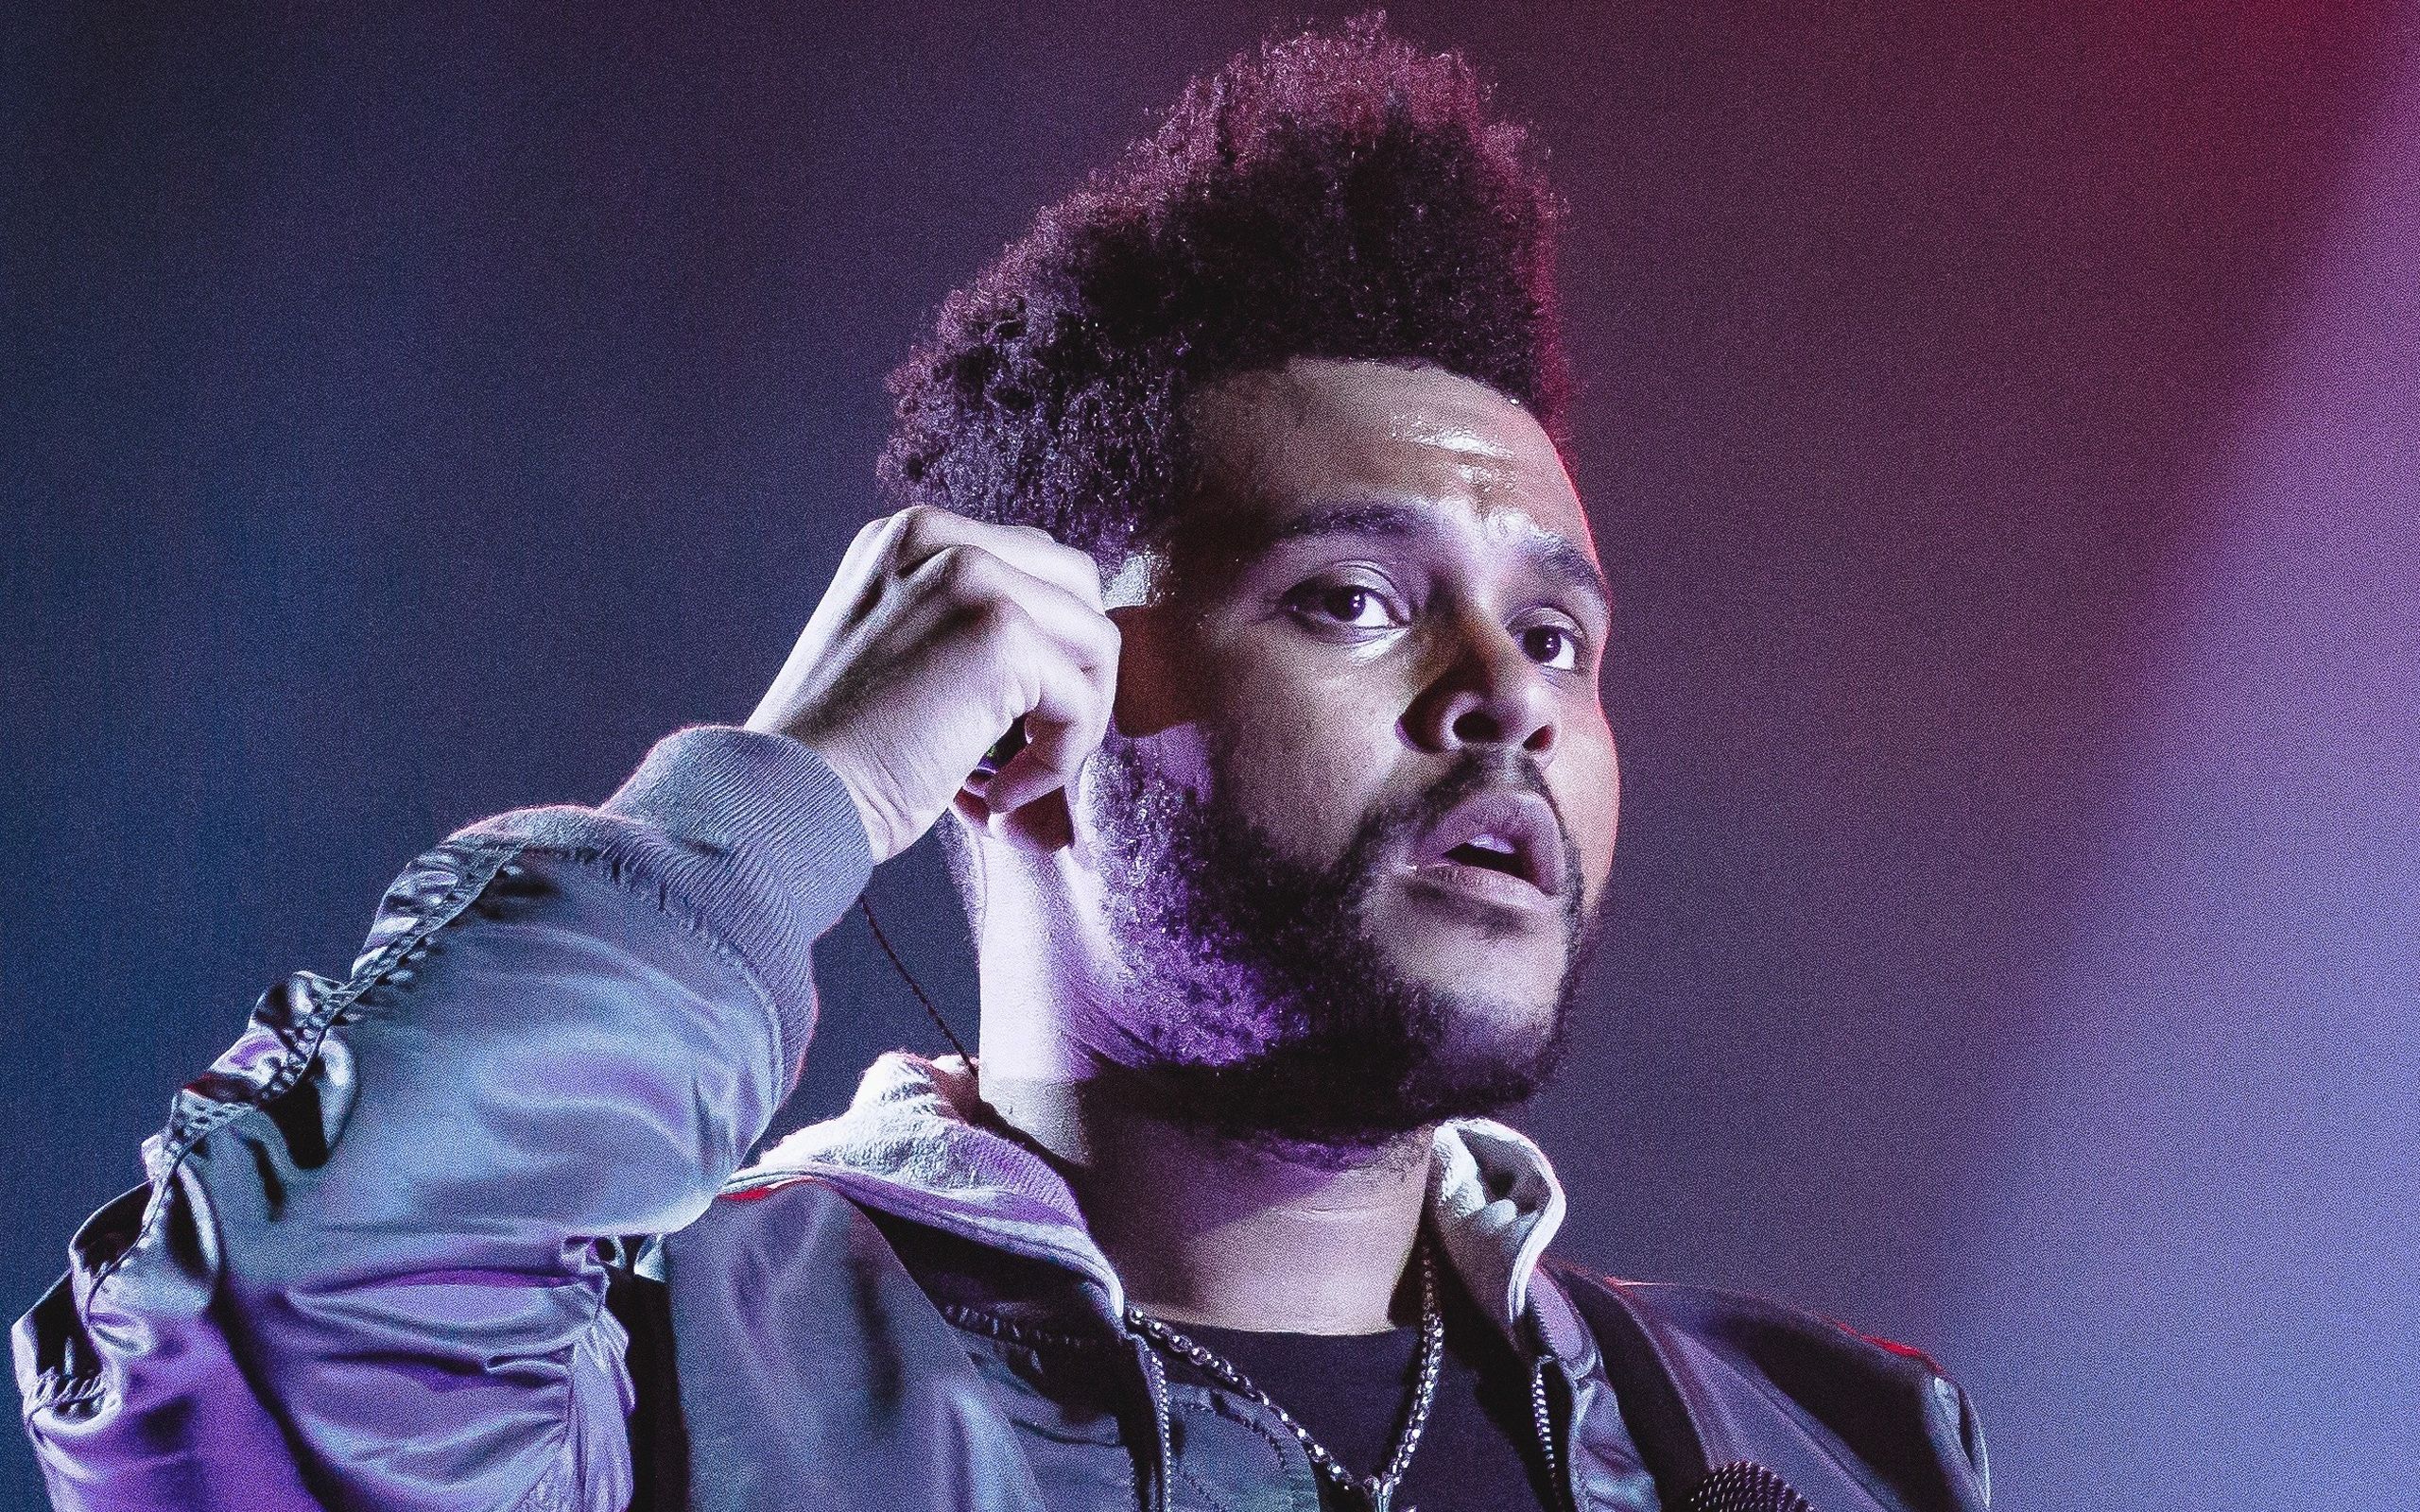 Download wallpaper The Weeknd, canadian singer, Abel Tesfaye, guys, celebrity for desktop with resolution 2560x1600. High Quality HD picture wallpaper